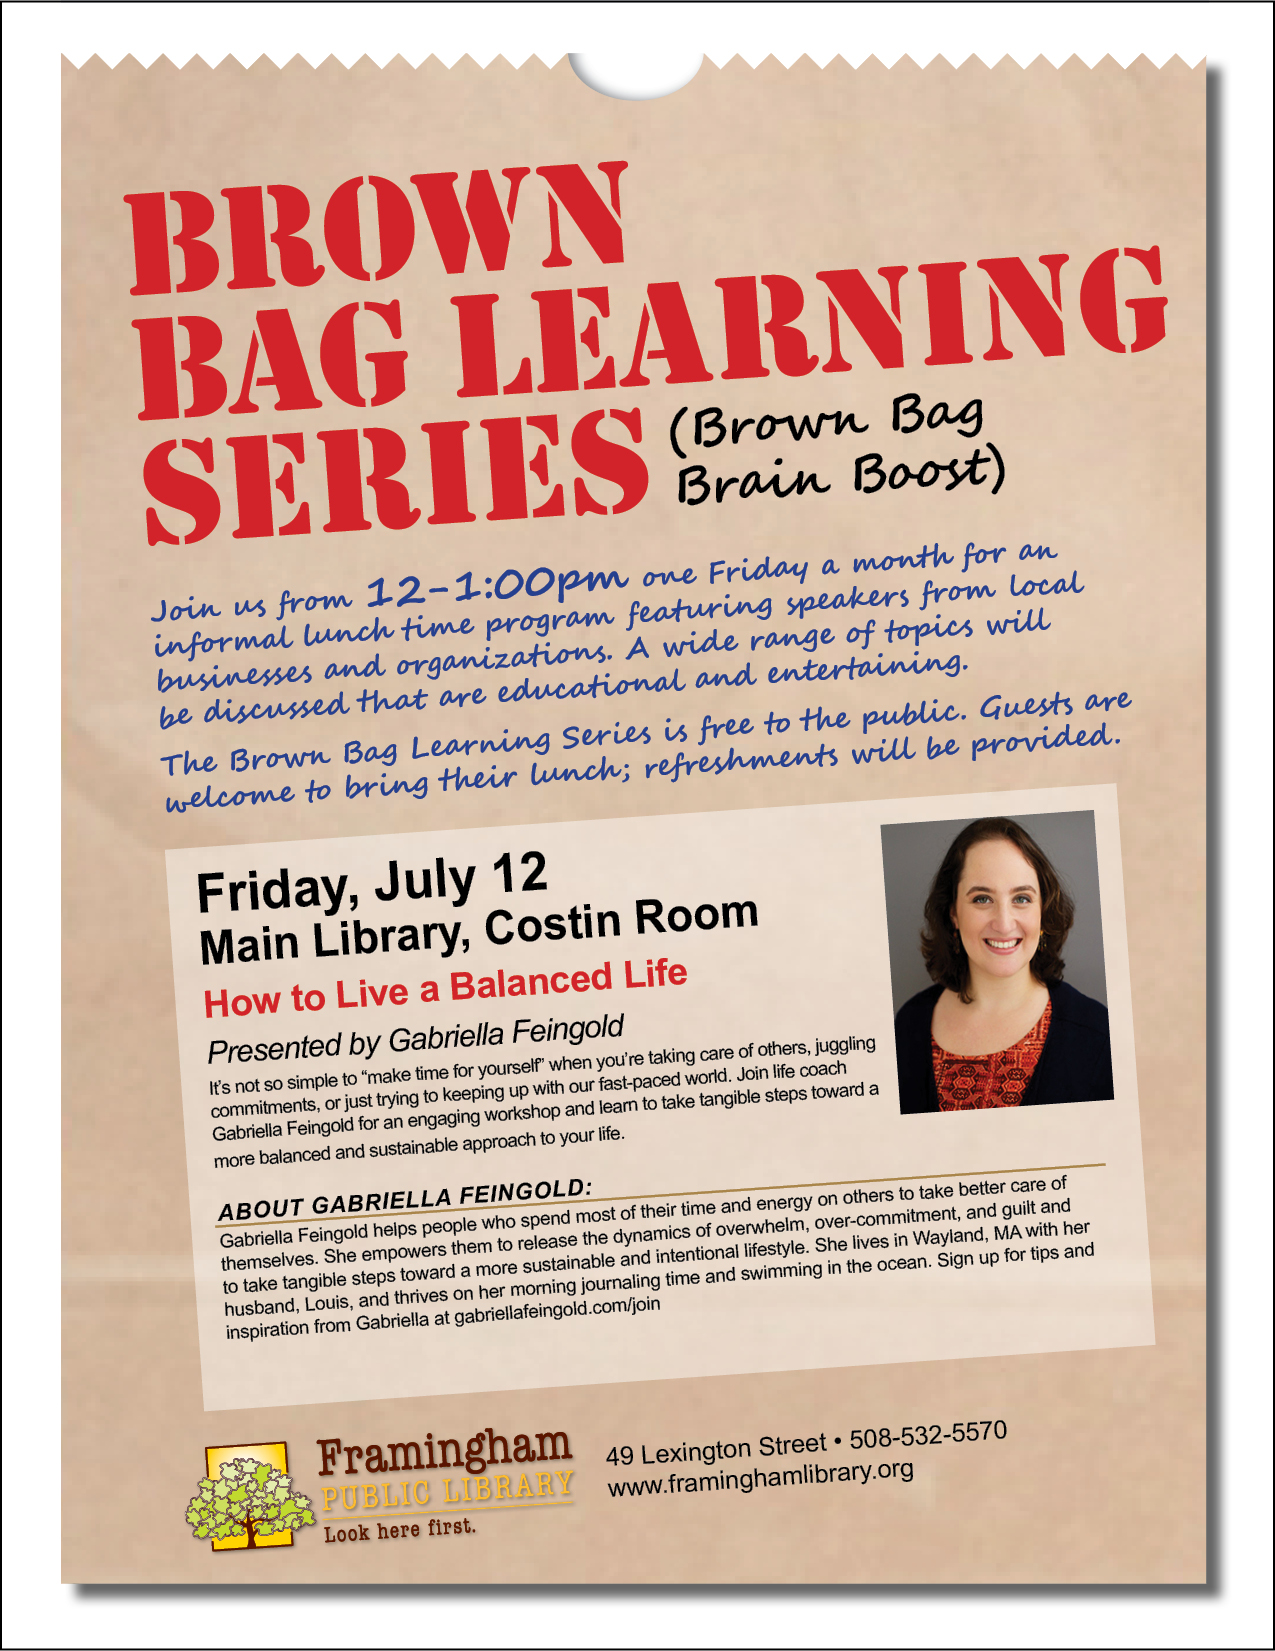 Brown Bag Learning Series: How to Live a Balanced Life thumbnail Photo